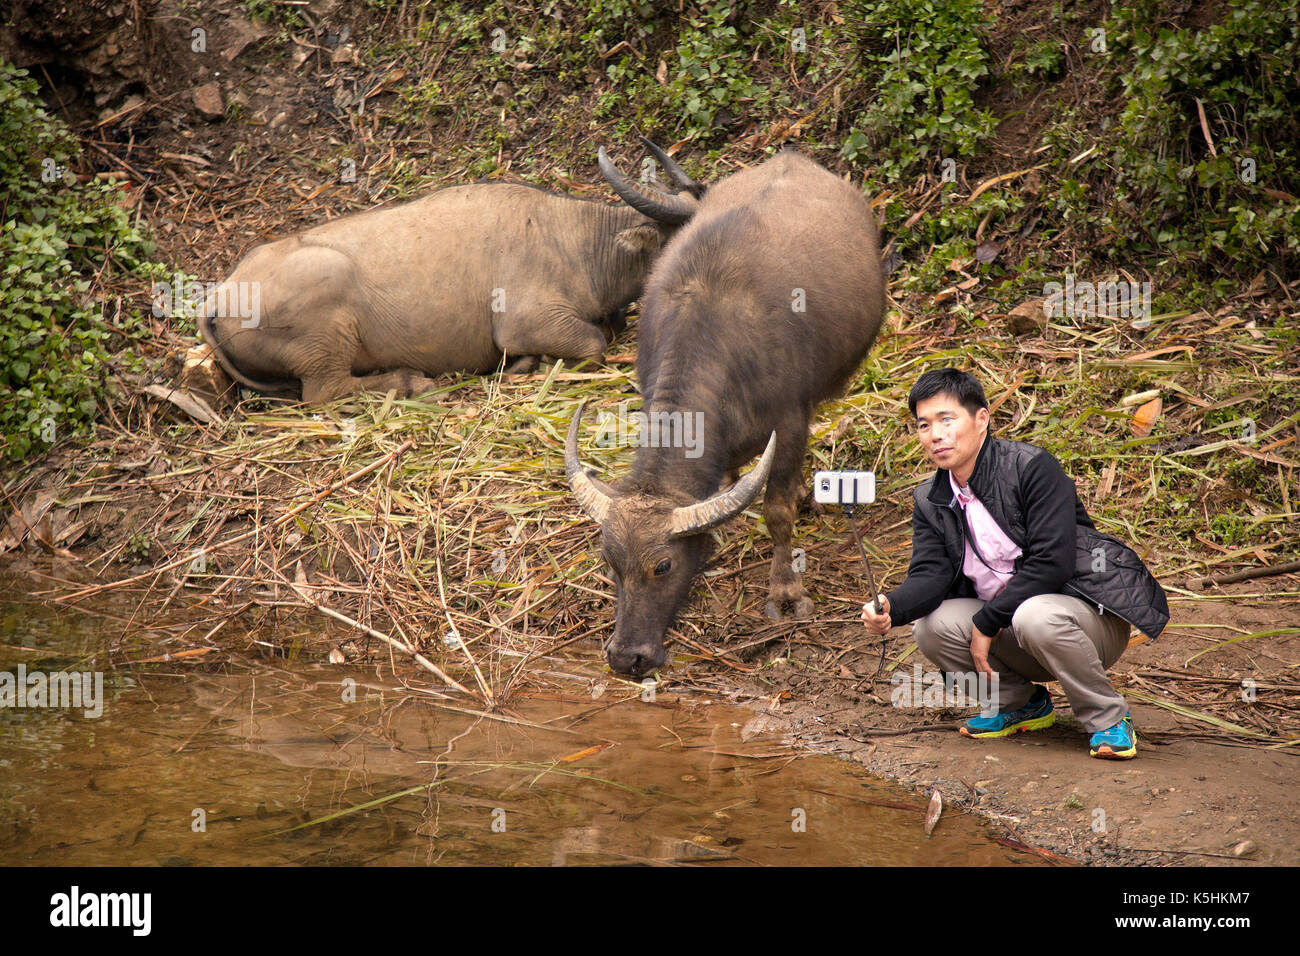 Oriental tourist takes a selfie photo with water buffalo using a selfie stick Stock Photo